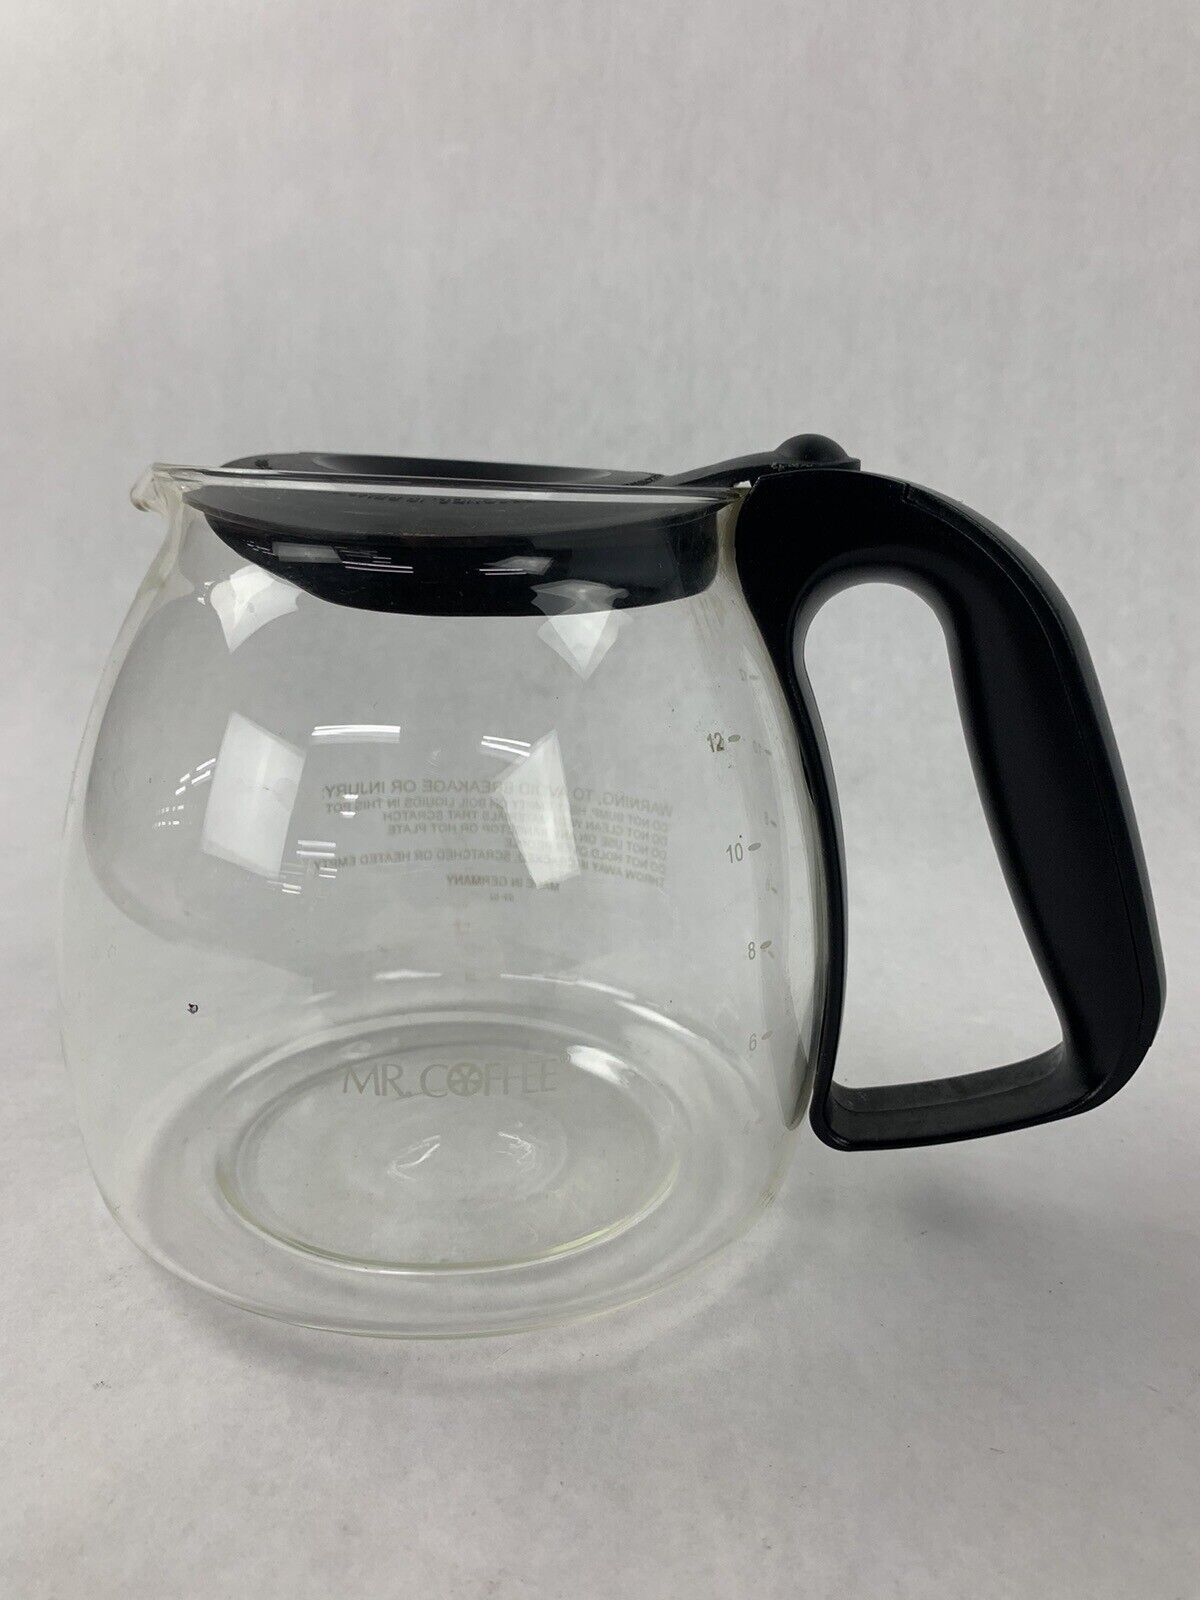 Replacement Coffee Carafe for Black and Decker 12-CUP Coffee Maker, Black  Handle